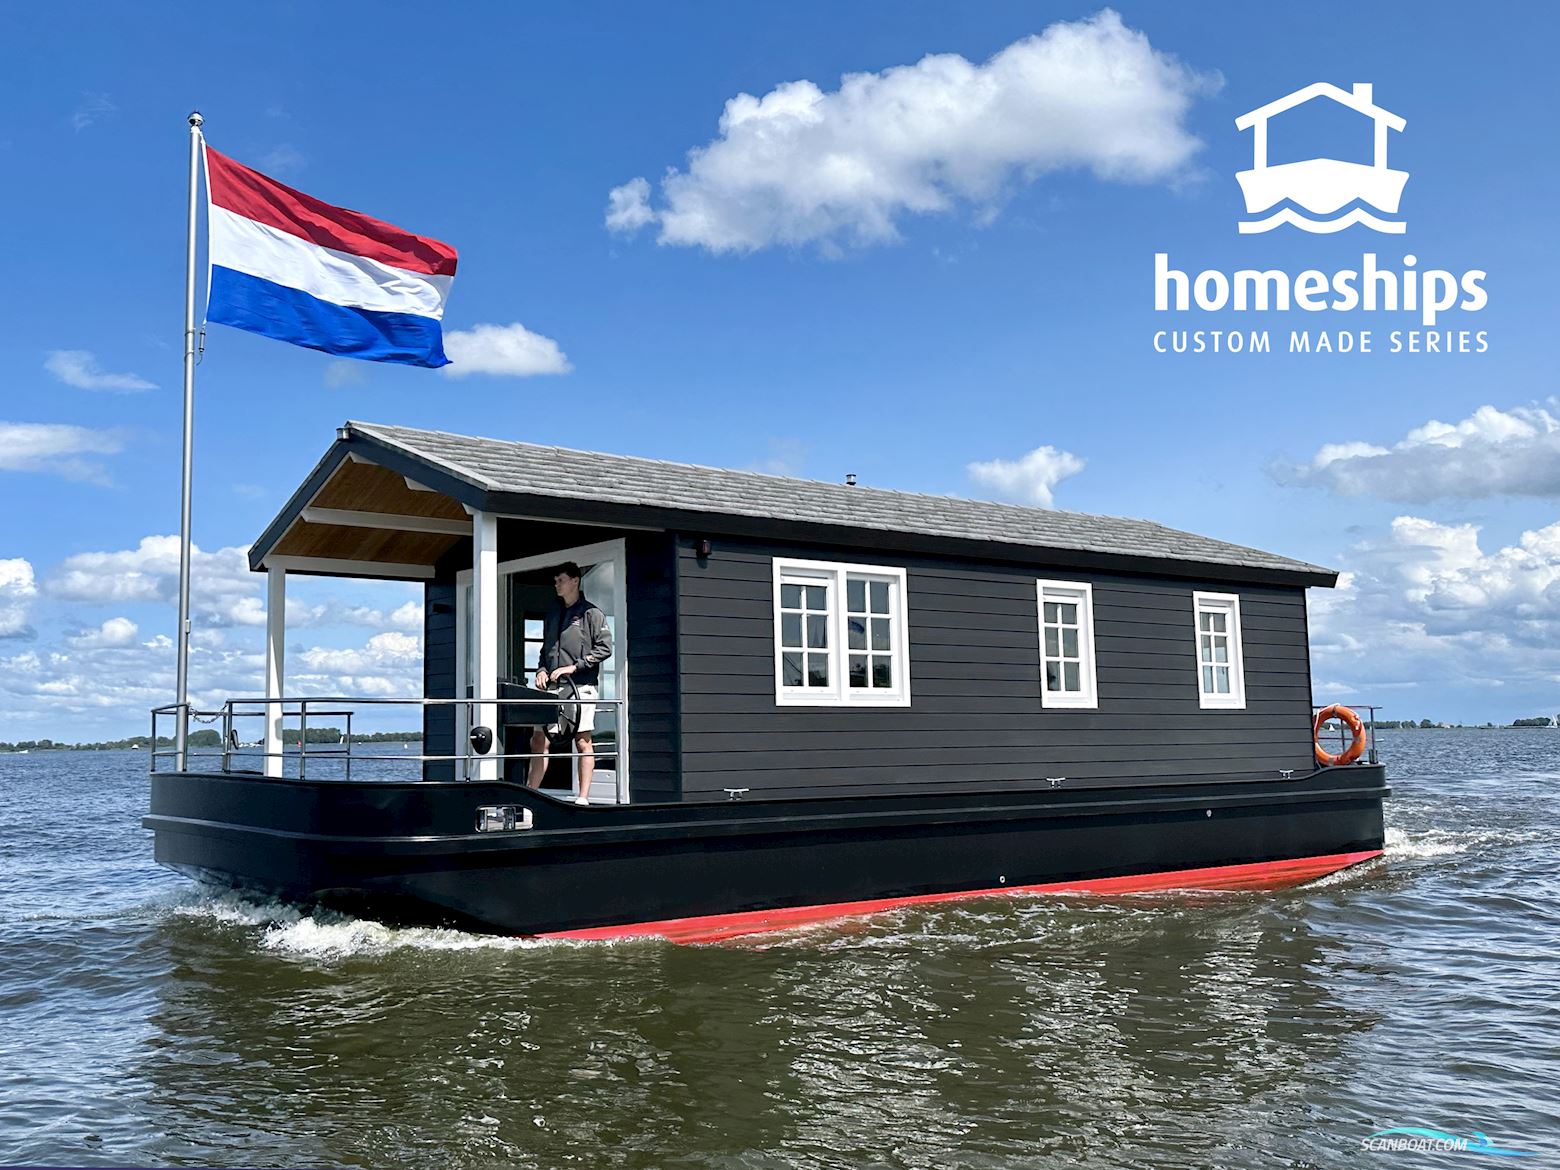 Homeship Vaarchalet 1250D Luxe Houseboat Live a board / River boat 2023, with Vetus engine, The Netherlands